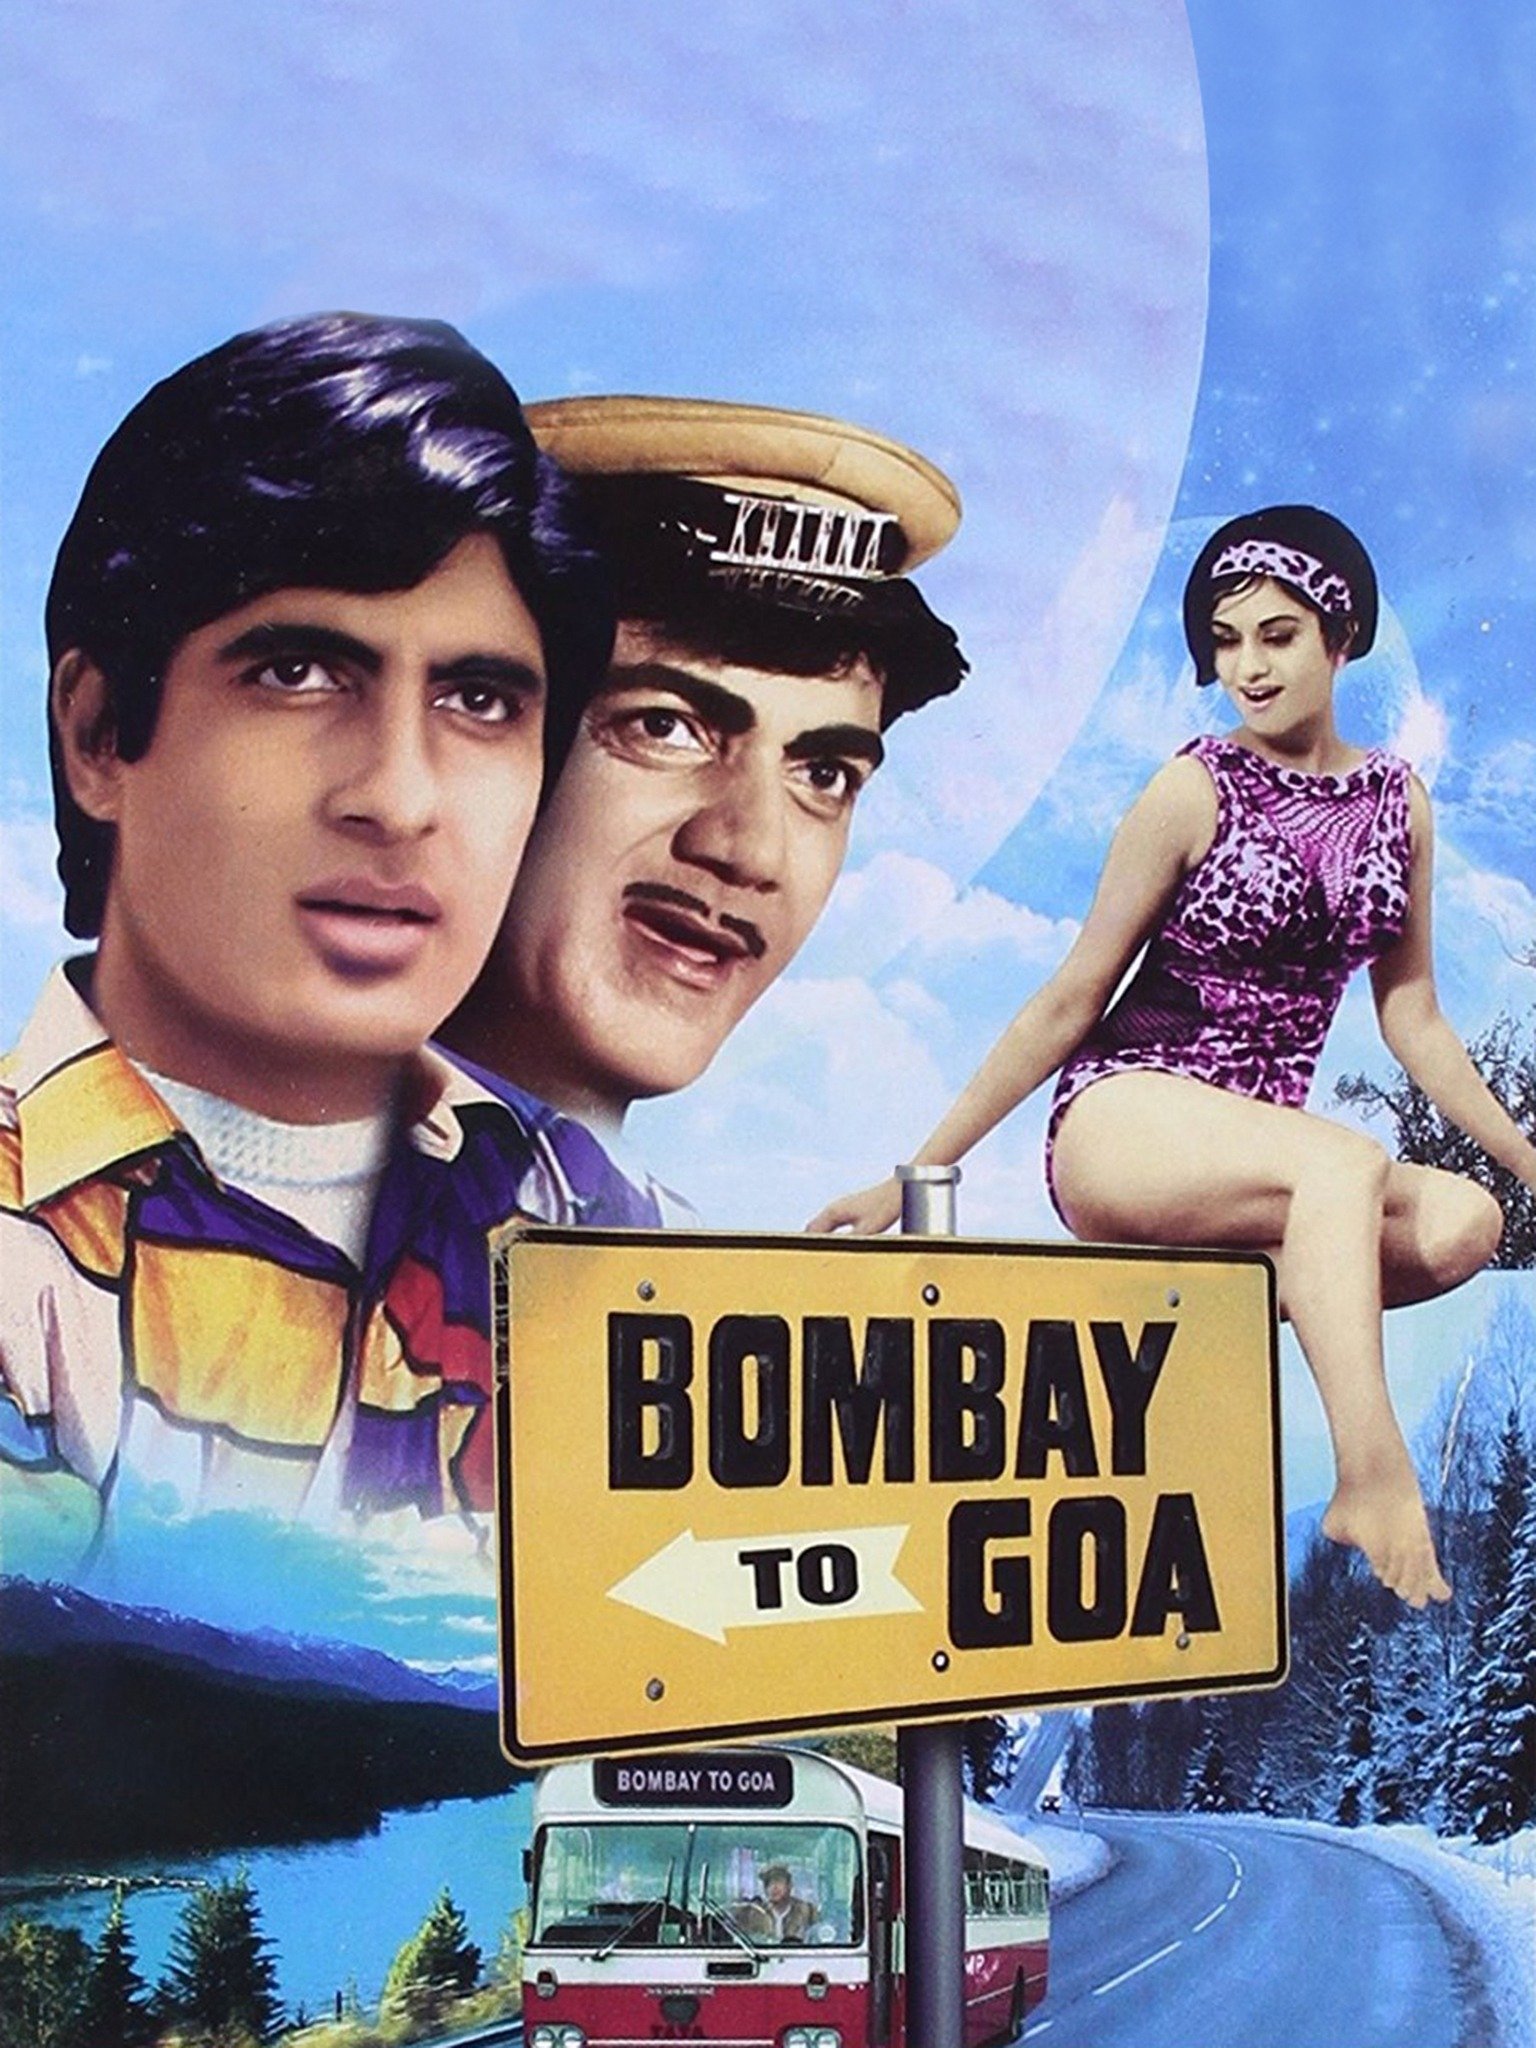 journey bombay to goa full movie hd 1080p free download